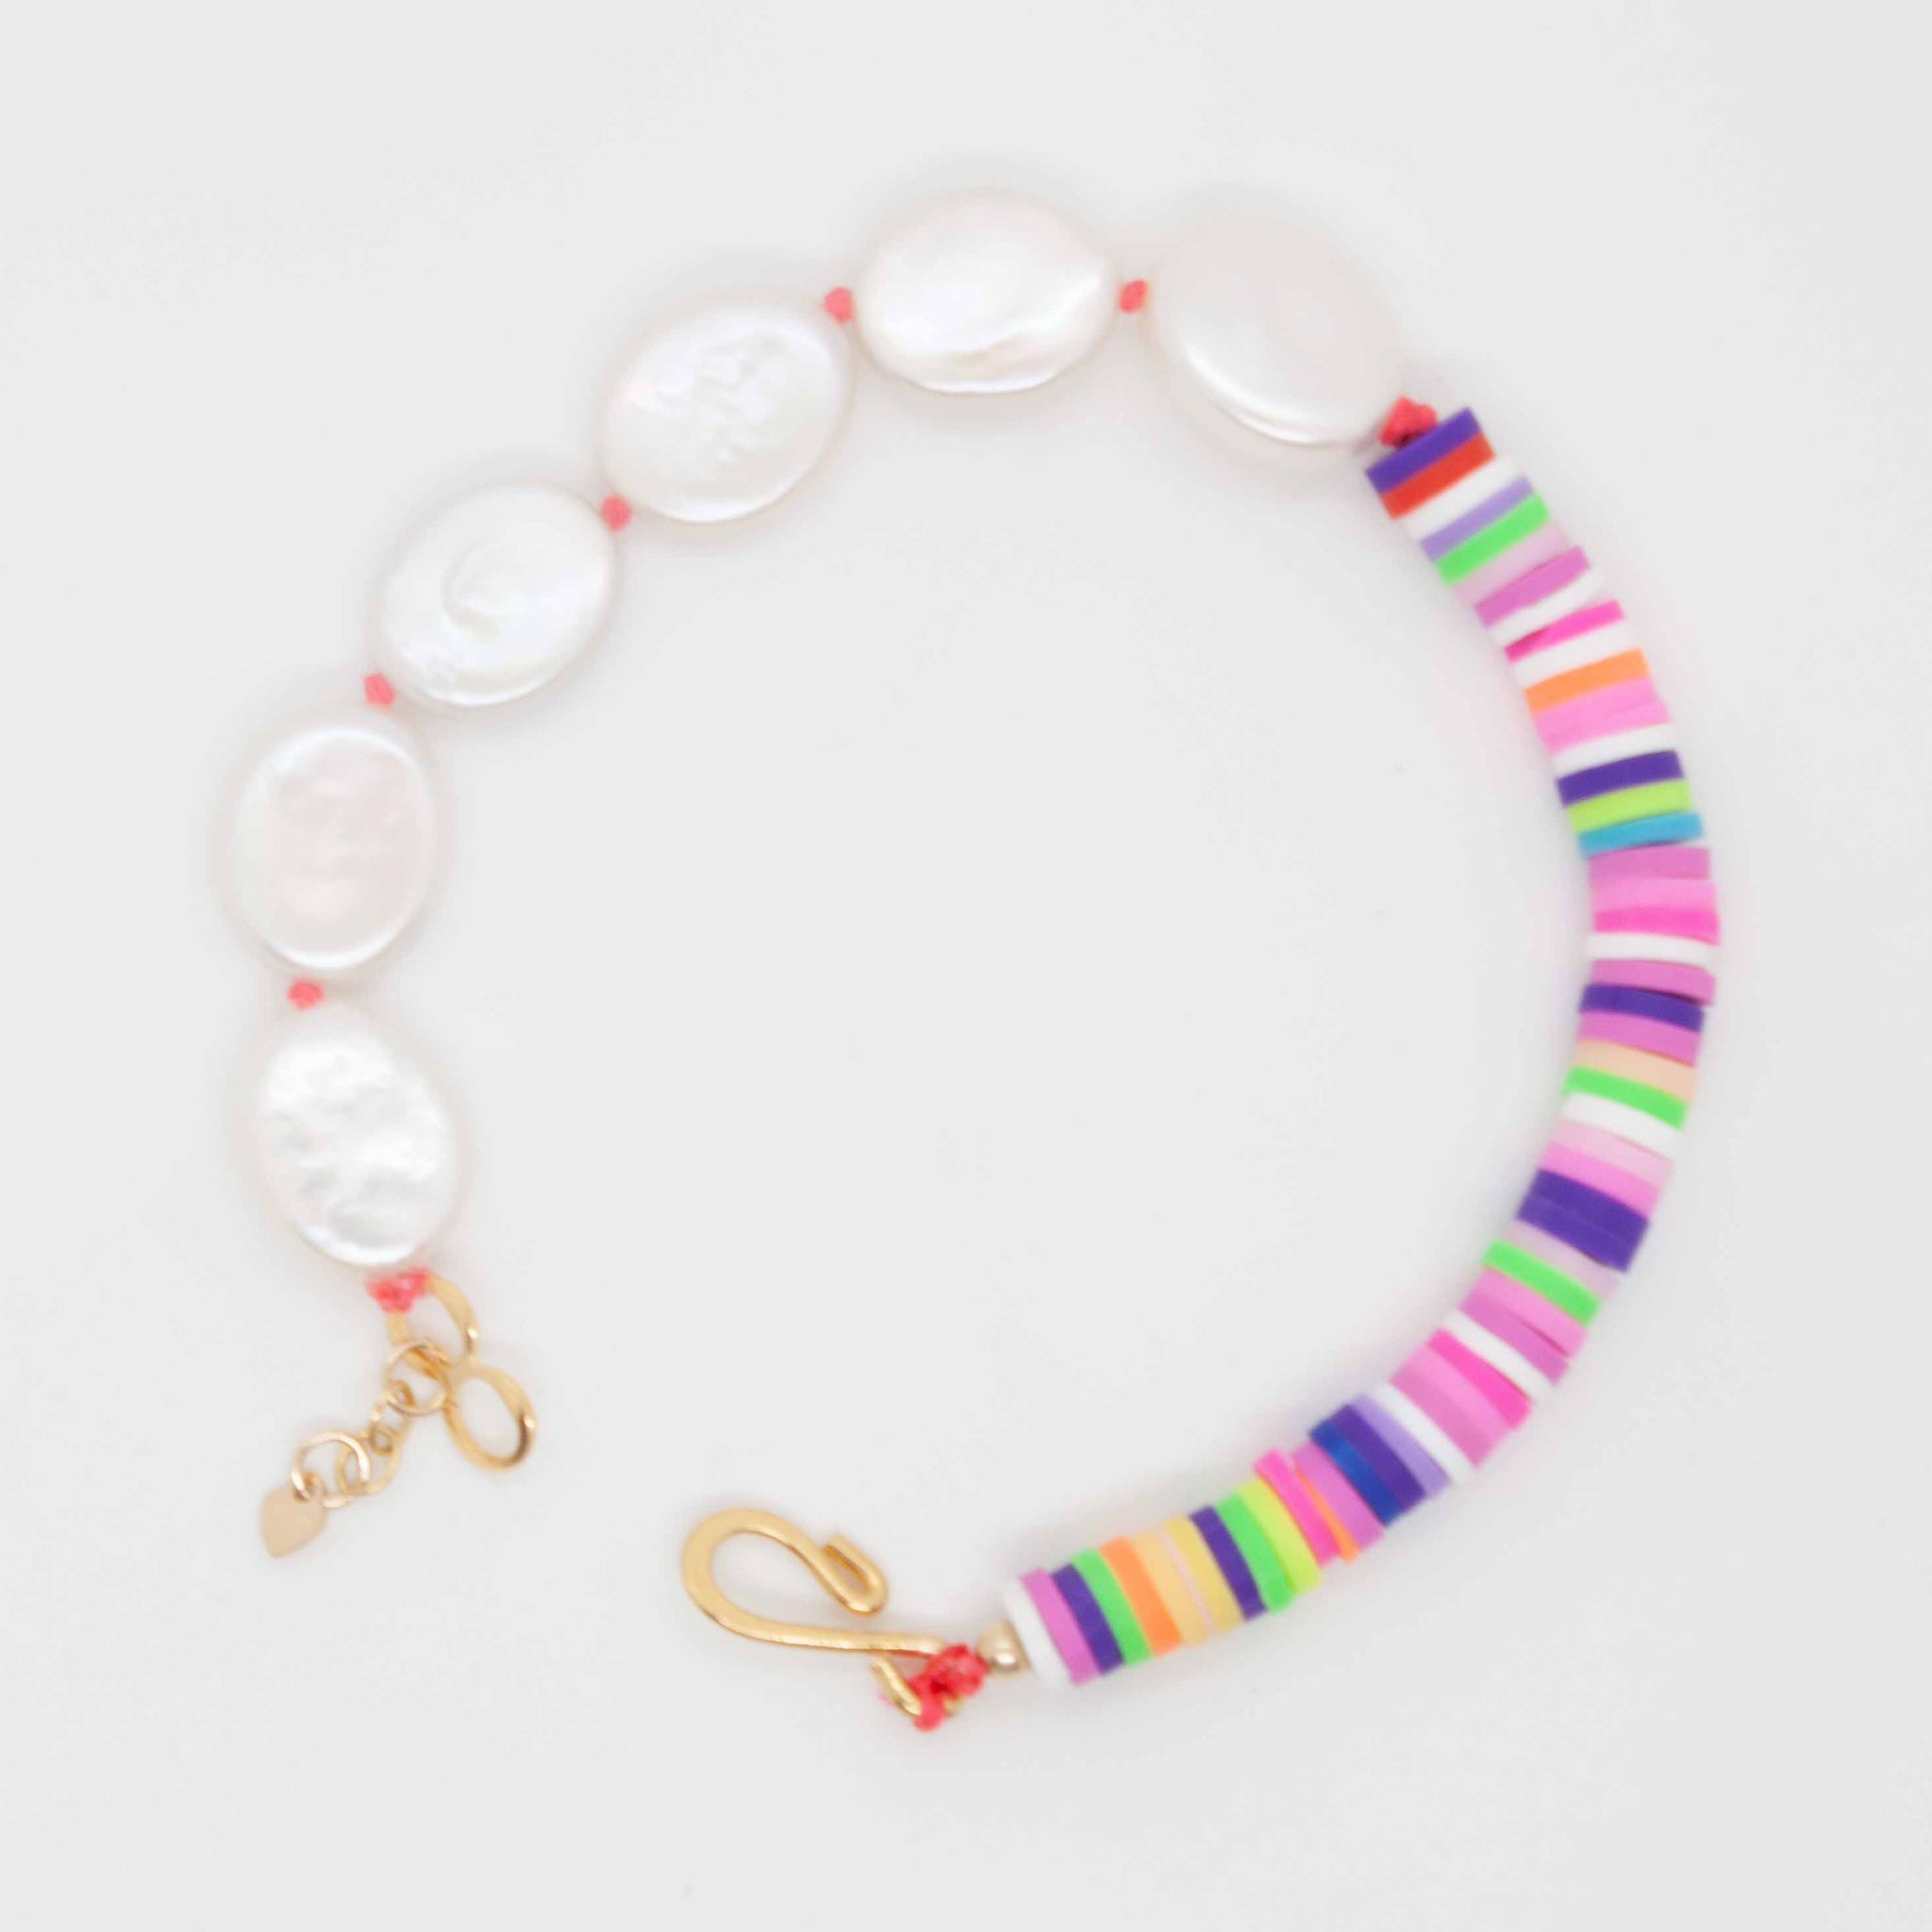 Surprise those traditional pearls with a pop of fun-loving colour! 20 inch (adjustable to 22 inches) hand knotted pearl necklace with multicolour vinyl heishi beads. Handmade in Toronto by kp jewelry co.